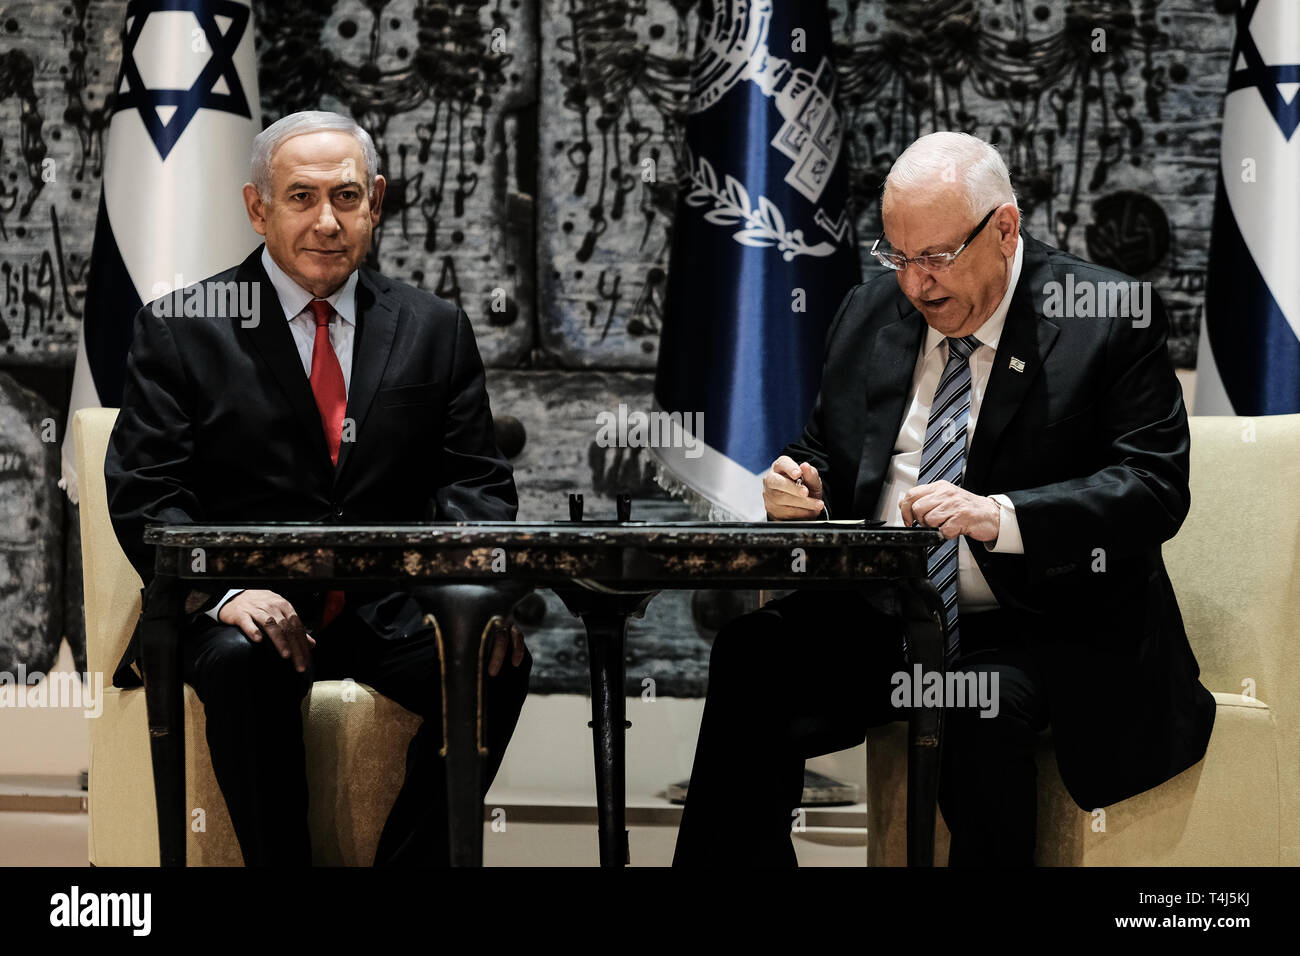 Jerusalem, Israel. 17th April, 2019.  Israeli President REUVEN RIVLIN (R) signs a letter of appointment tasking incumbent Prime Minister BENJAMIN NETANYAHU (L) with formation of the next coalition government following April 9th, 2019 elections. Netanyahu's Likud party won 35 of 120 parliament seats in a tie with Blue and White party but has best chance to succeed in forming a coalition based on President's consultations with representatives of all elected parties. Credit: Nir Alon/Alamy Live News Stock Photo